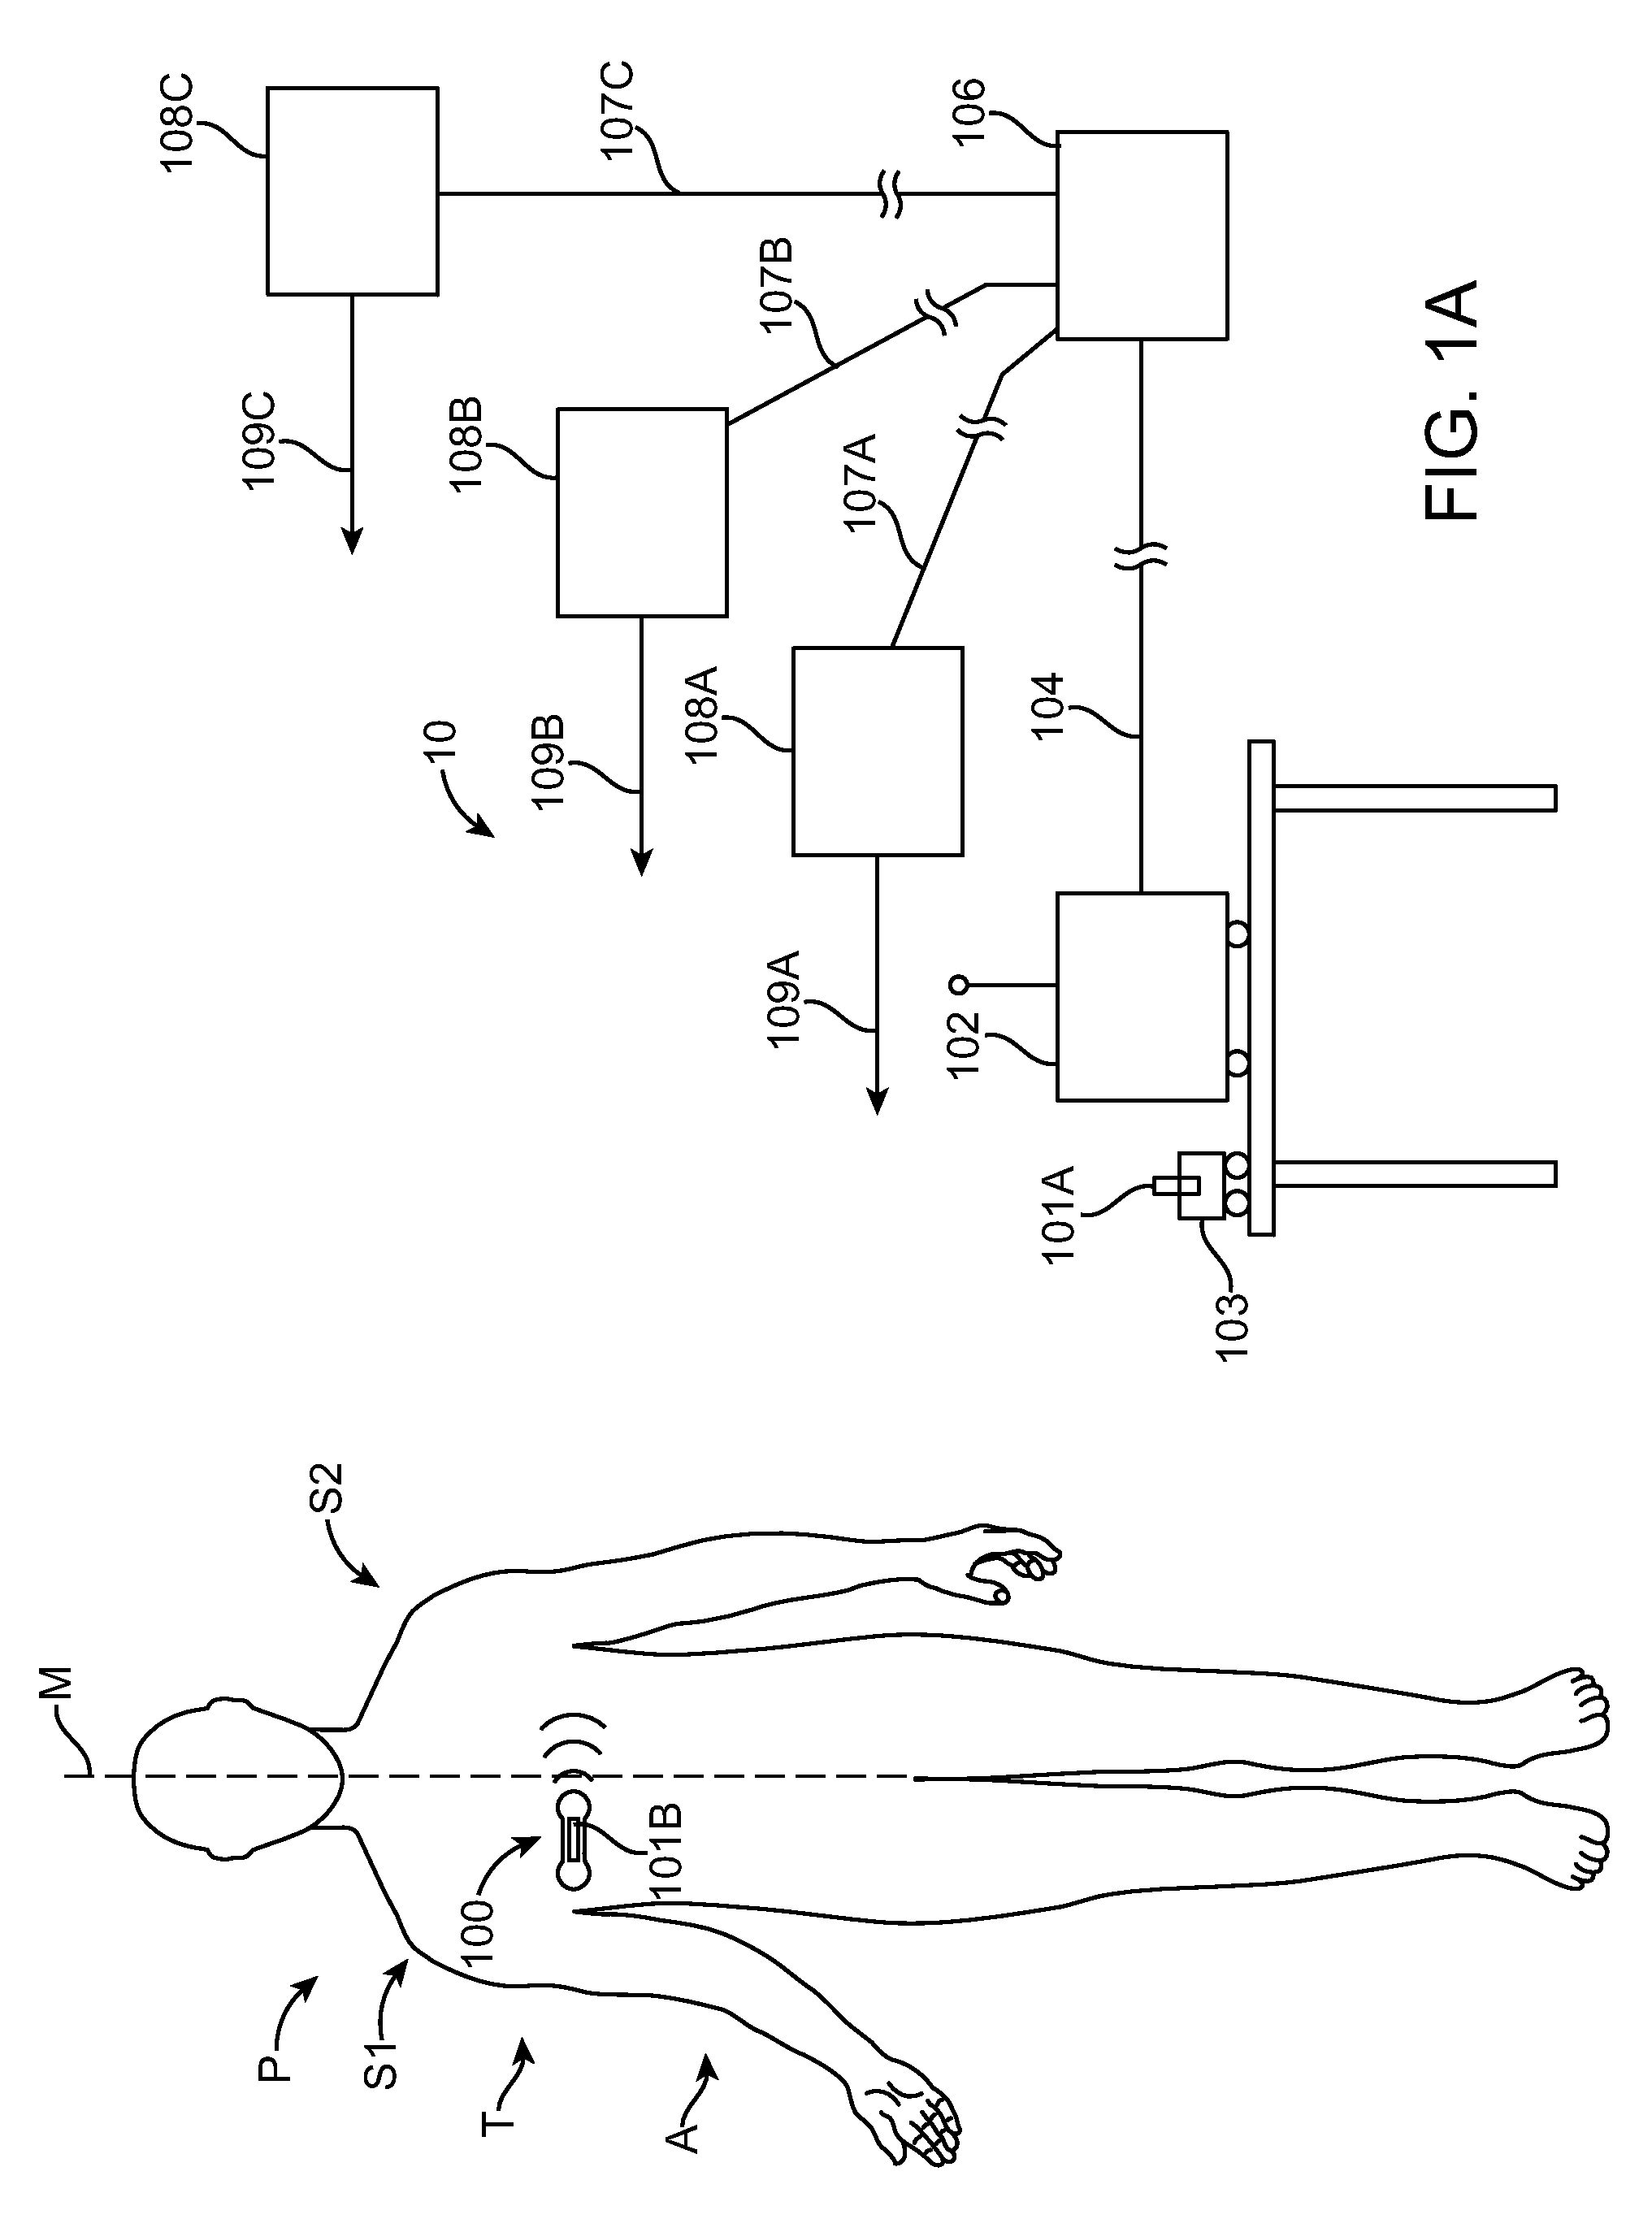 Method and apparatus to measure bioelectric impedance of patient tissue